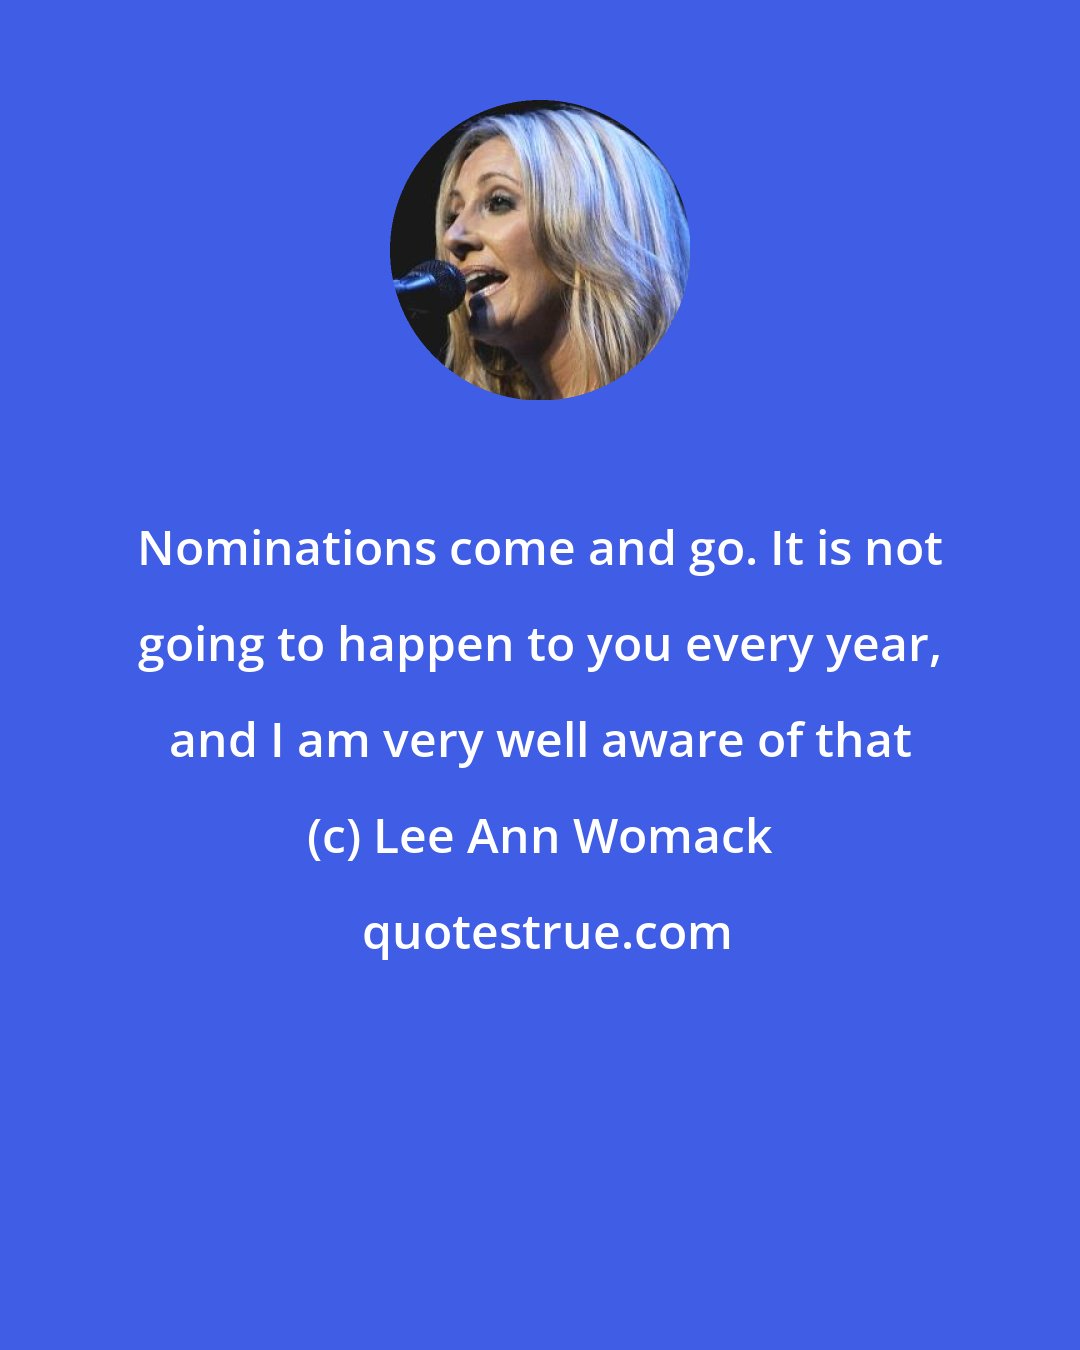 Lee Ann Womack: Nominations come and go. It is not going to happen to you every year, and I am very well aware of that